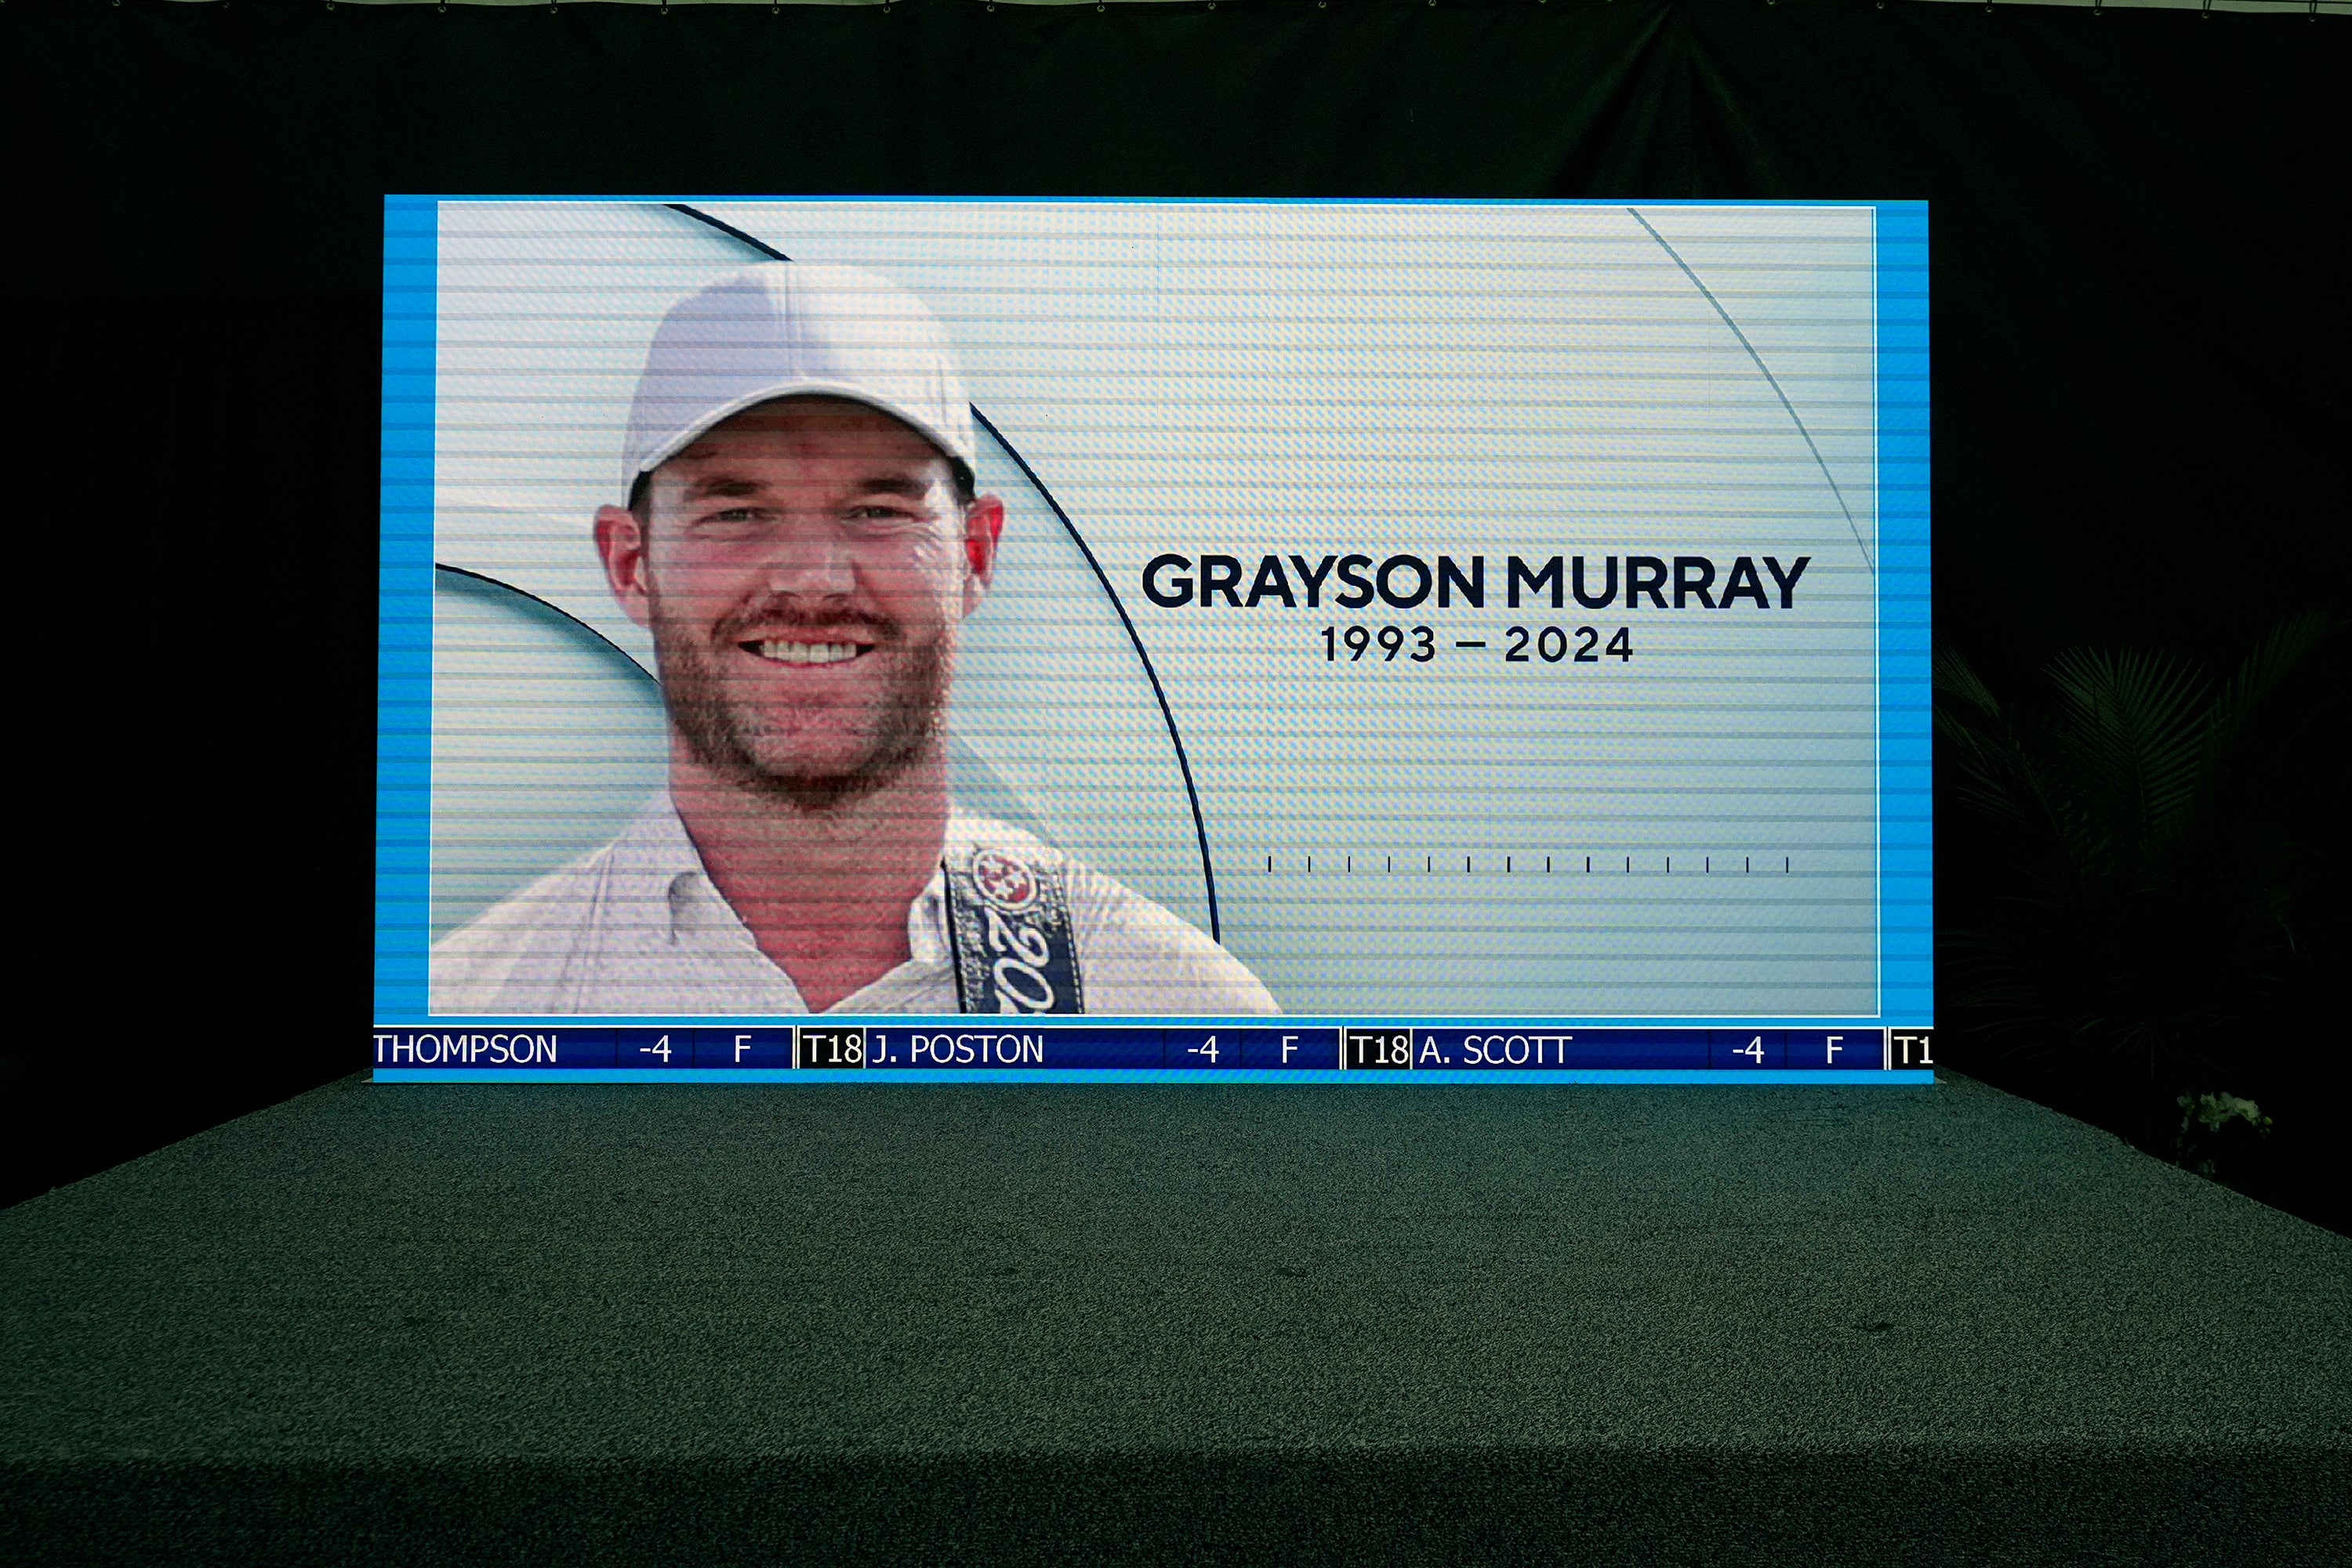 A golf broadcast by CBS is played on an empty stage at the media center showing a photo of Grayson Murray qhiqqkikdidezinv